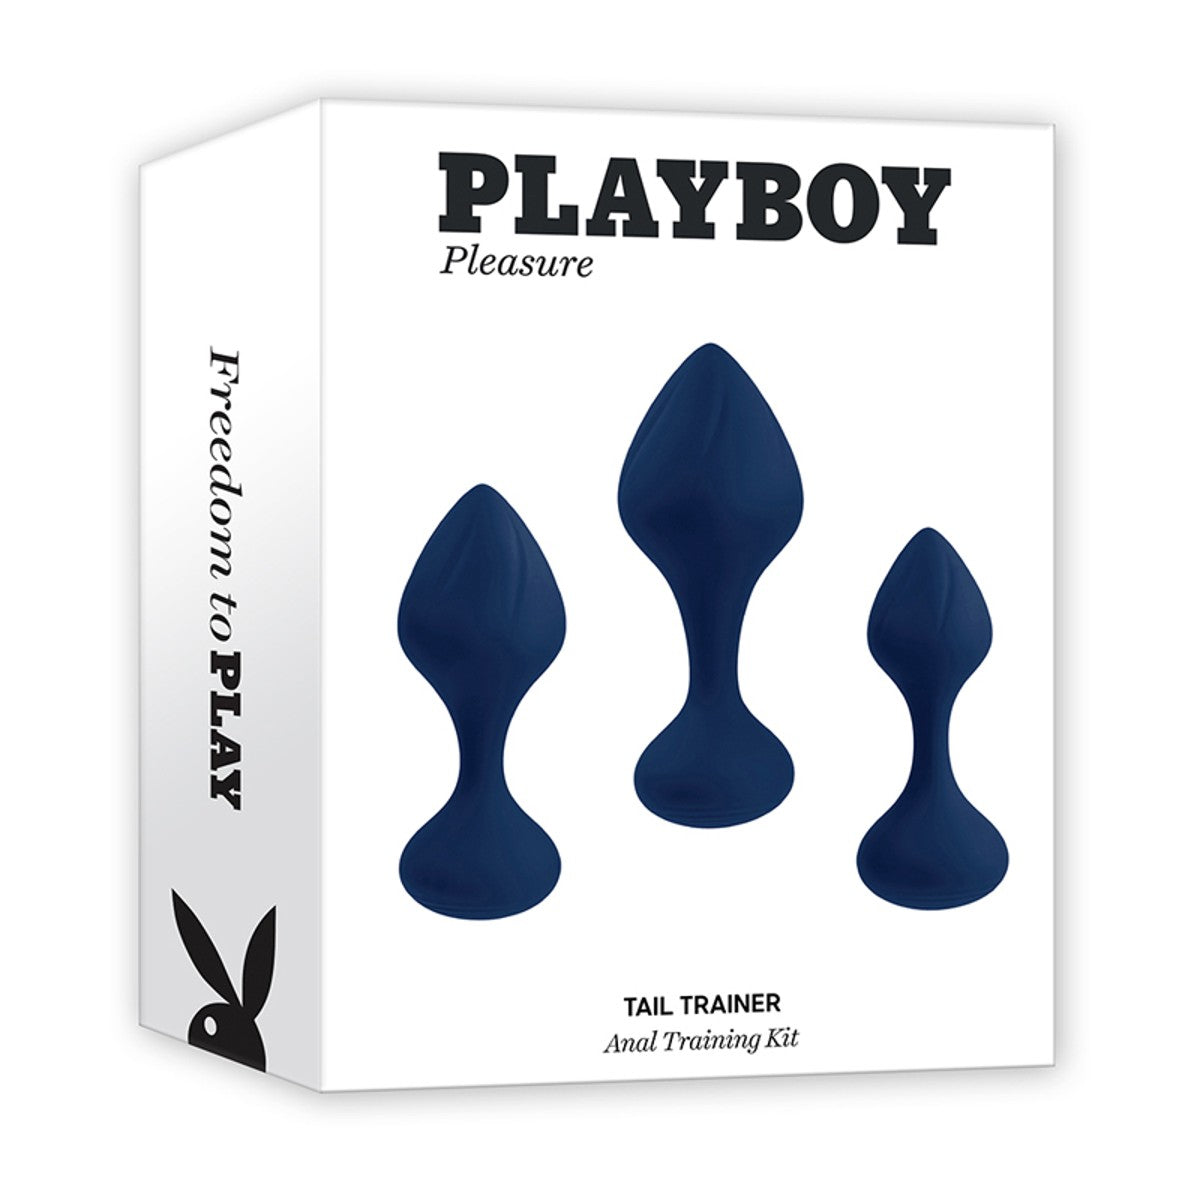 Evolved Playboy Tail Trainer Anal Kit